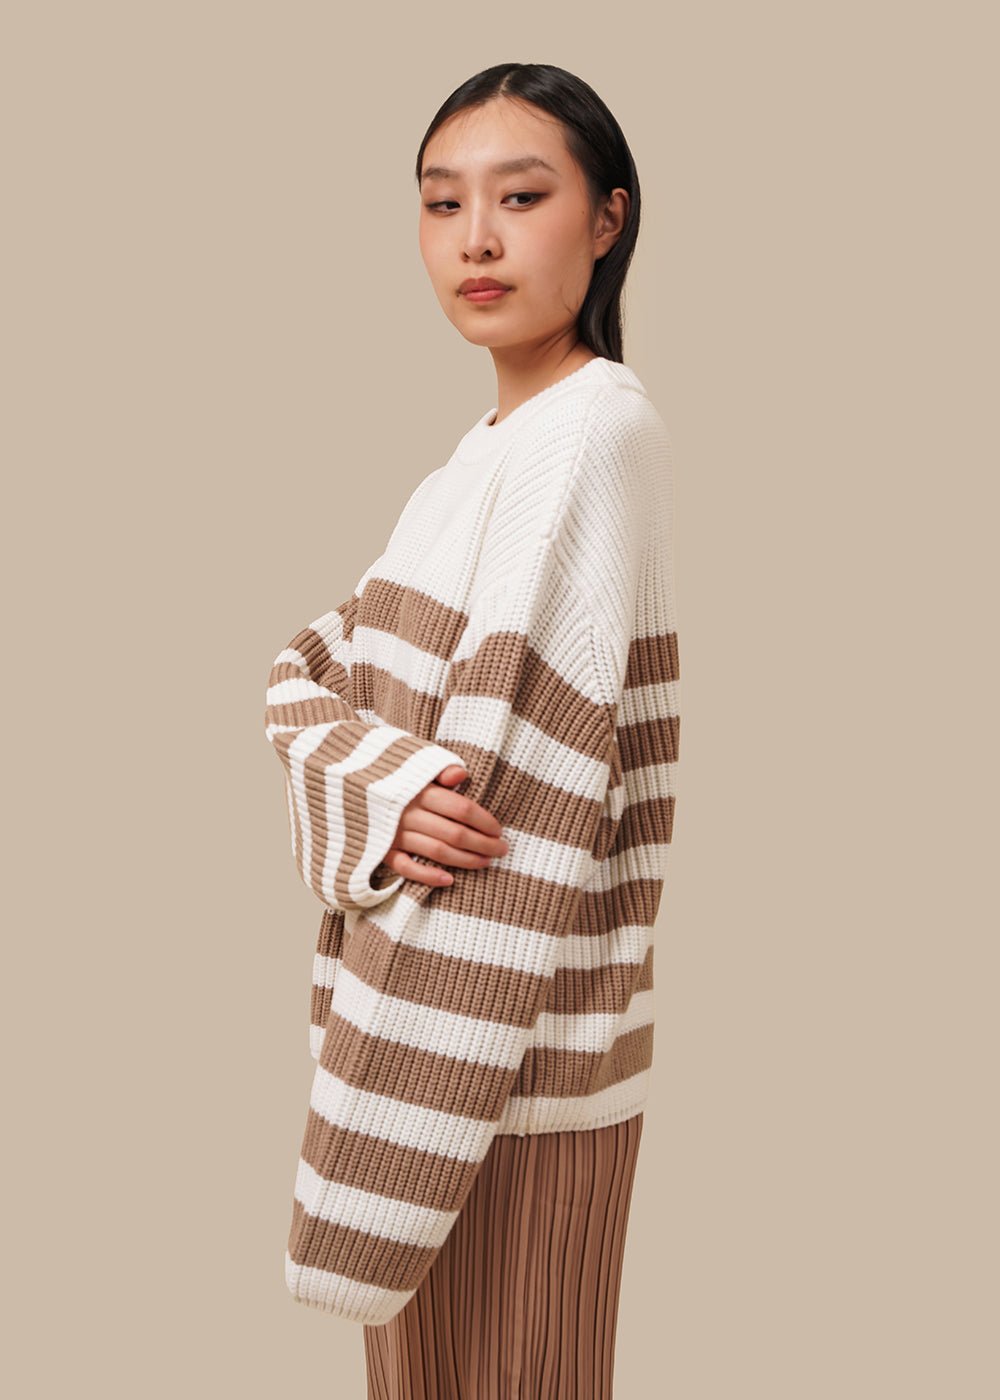 Stylein Aubry Sweater - New Classics Studios Sustainable Ethical Fashion Canada